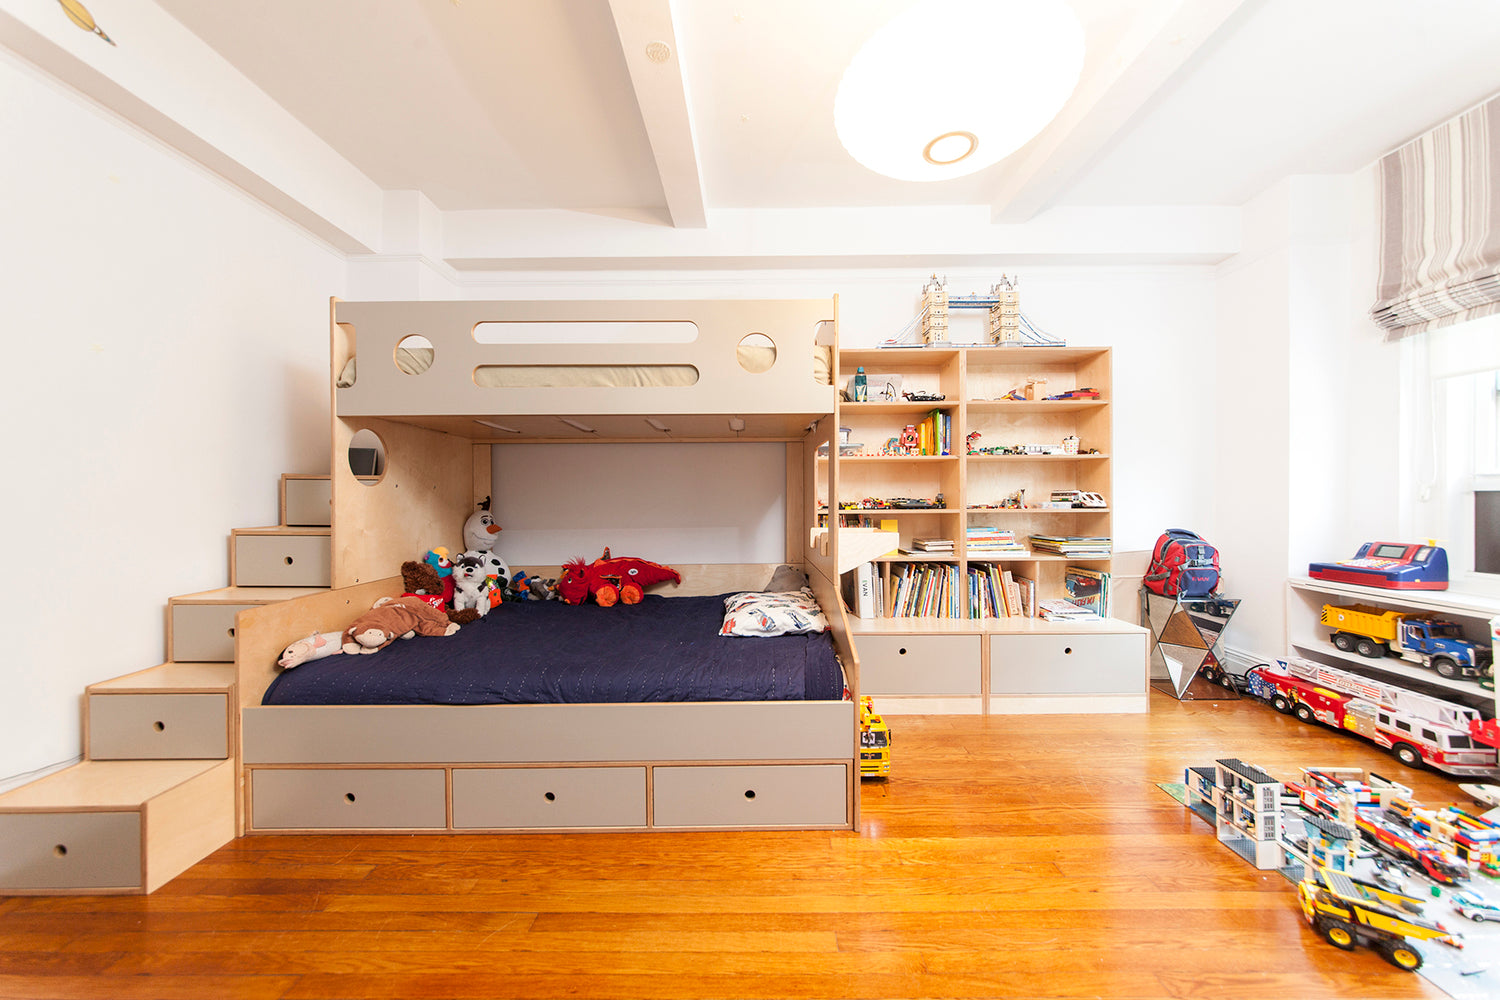 A cozy child’s bedroom with a bunk bed, bookshelf, toys, and a wooden floor.